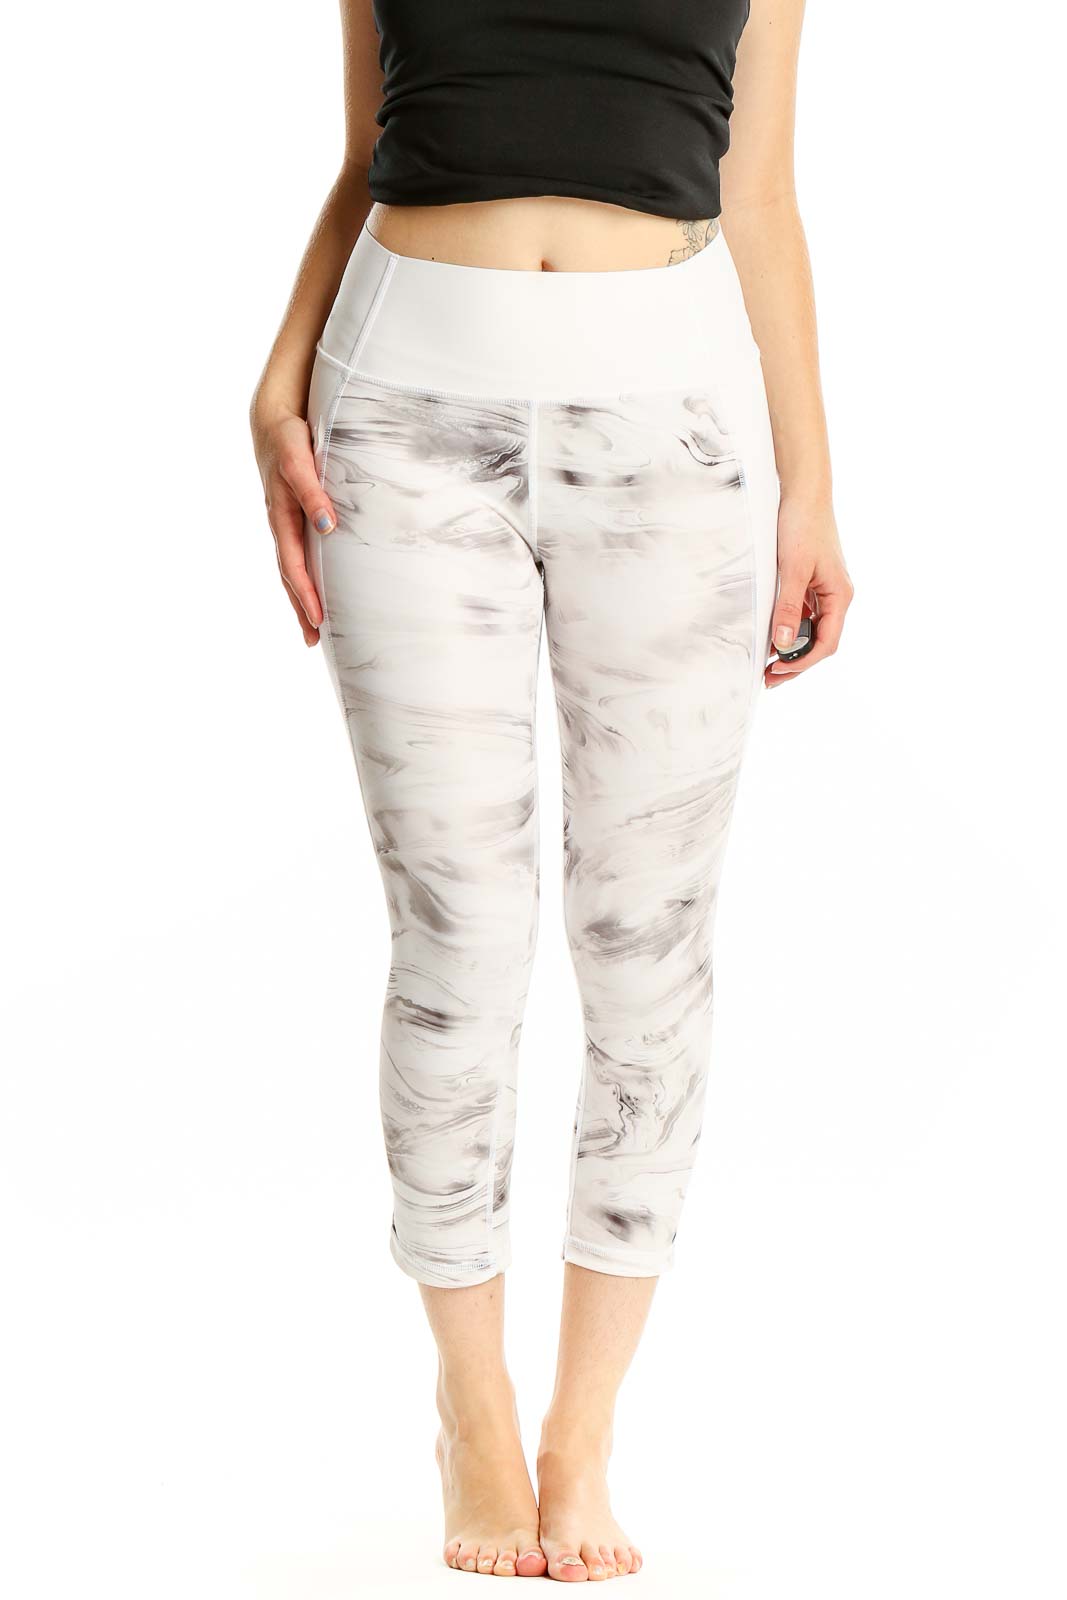 White Printed Cropped Leggings Front